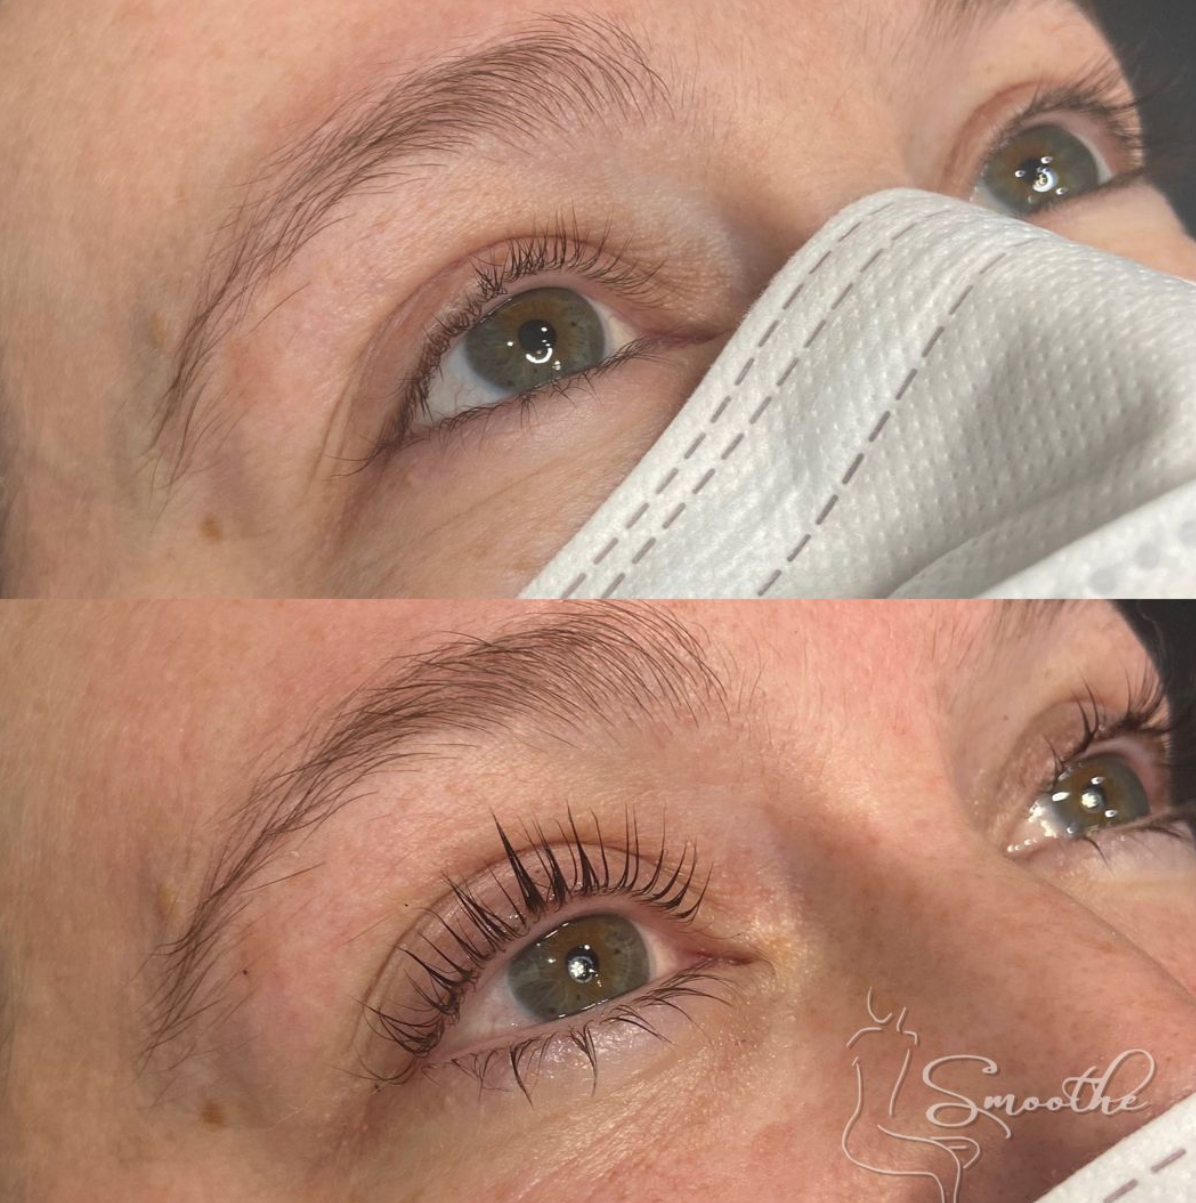 Lash Lift in at Smoothe LLC in Raleigh NC